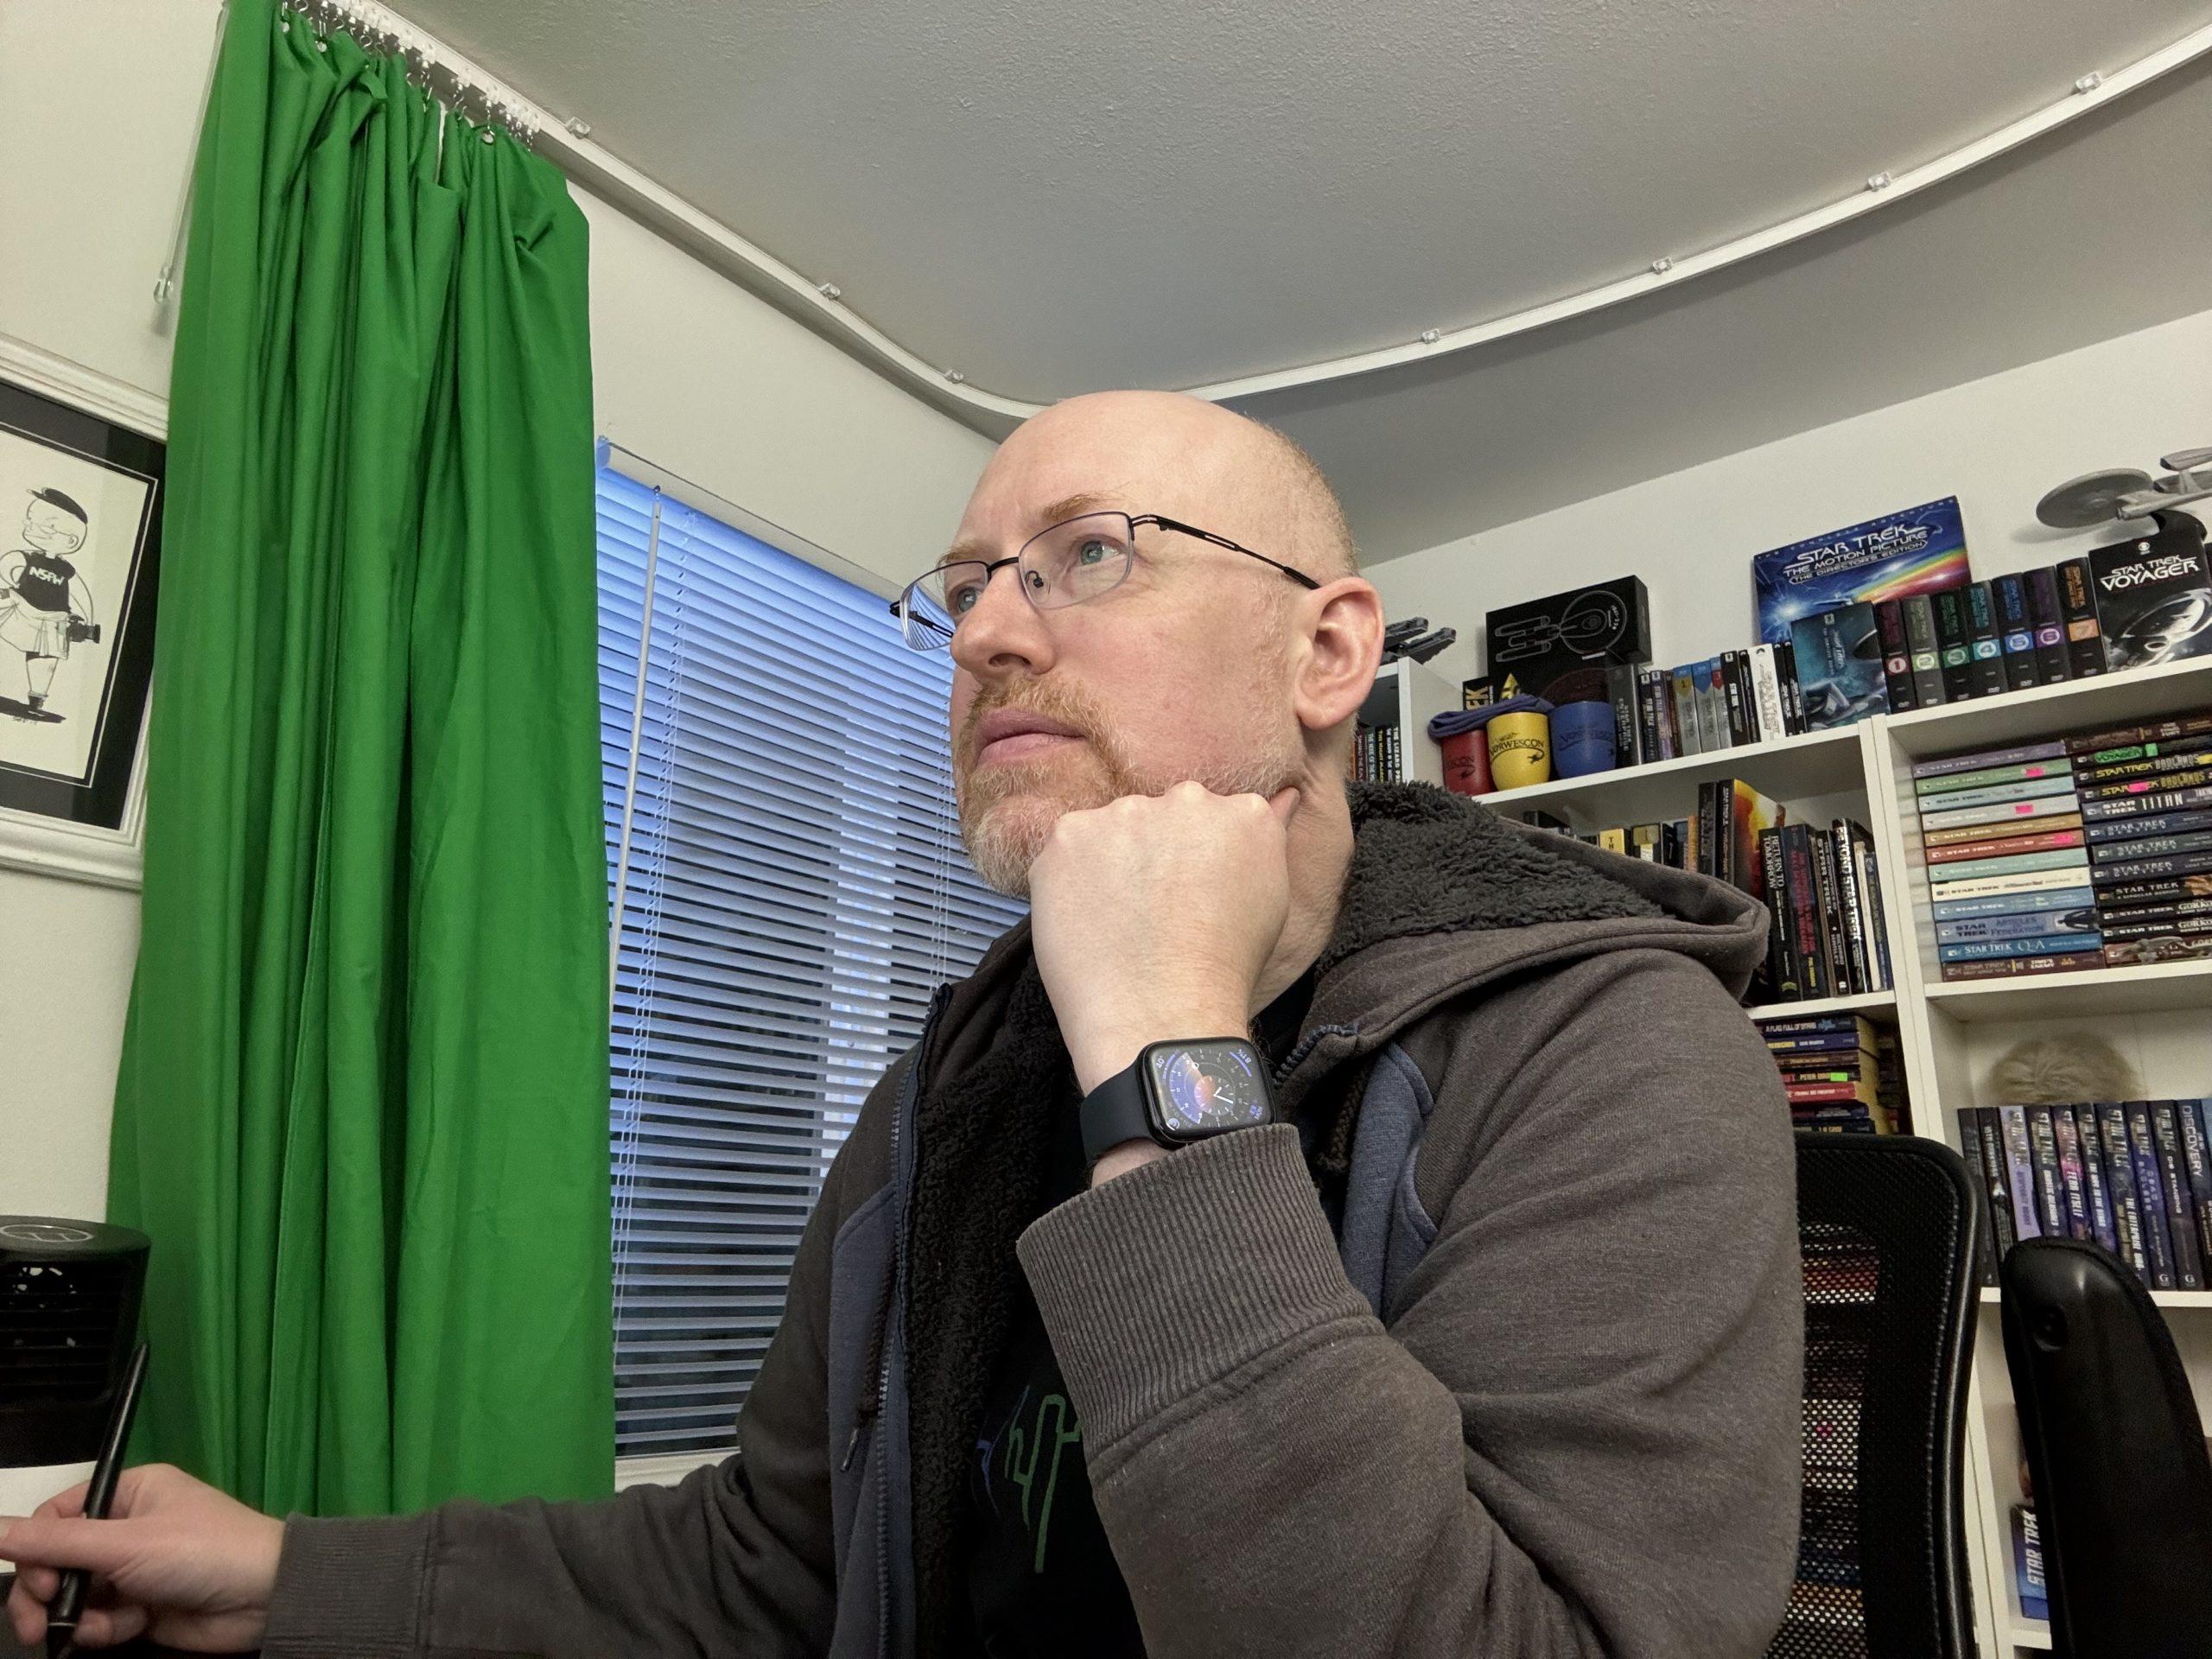 Me sitting in my home office, with a green screen curtain to my right and shelves of books behind me, looking at my computer.